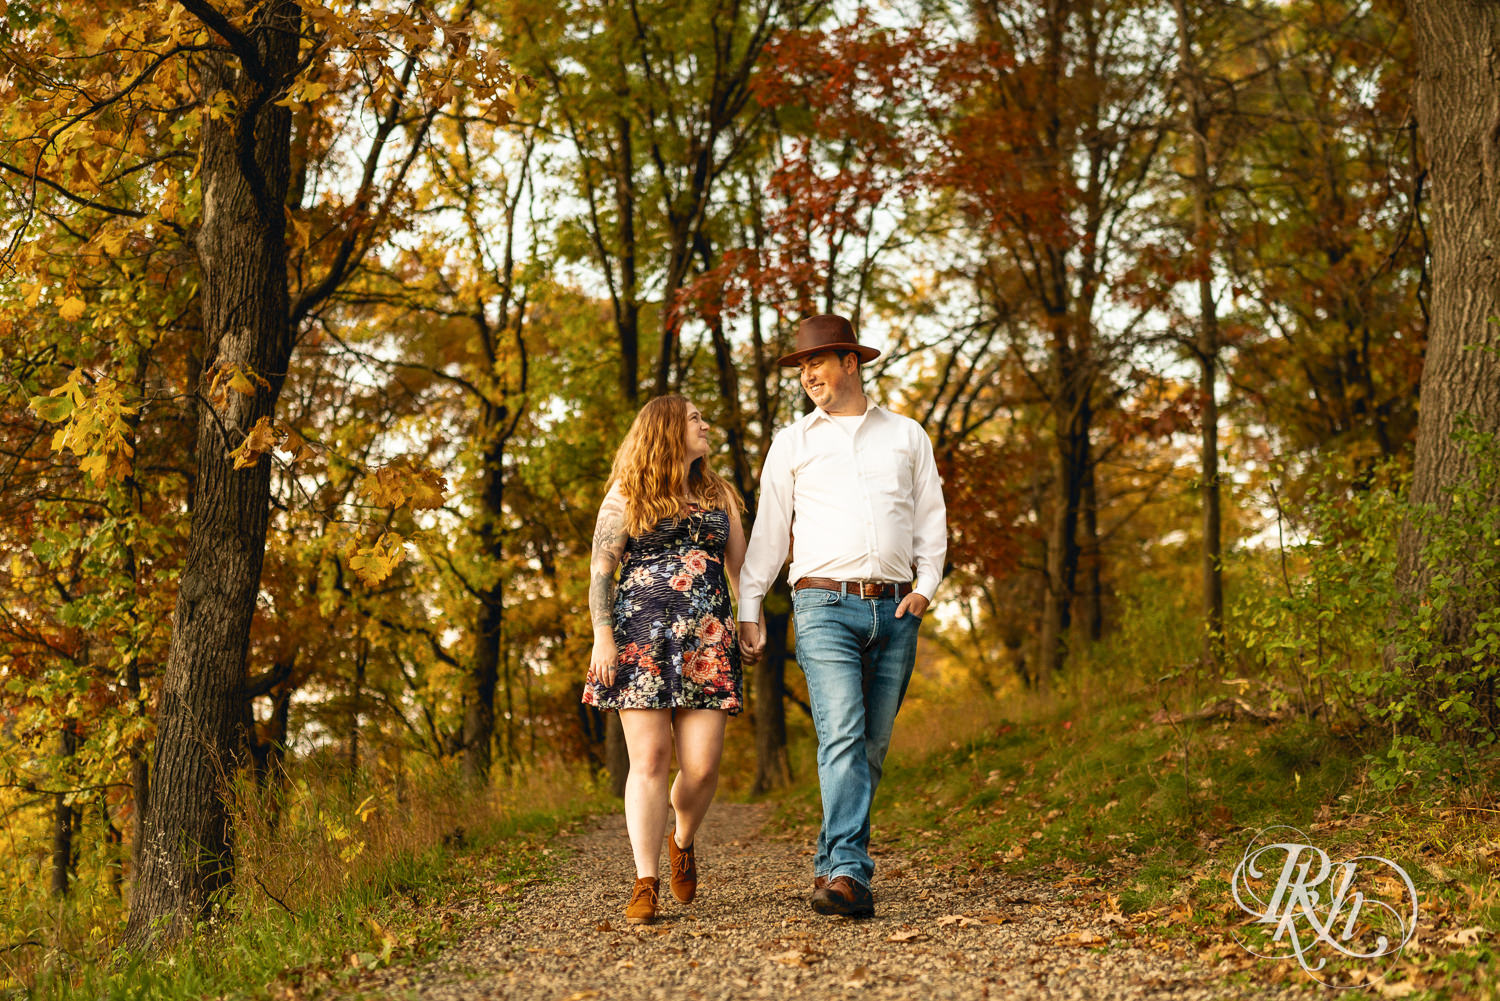 Man in hat and jeans and woman in dress walk down trail during fall engagement photos at Lebanon Hills Regional Park in Eagan, Minnesota.